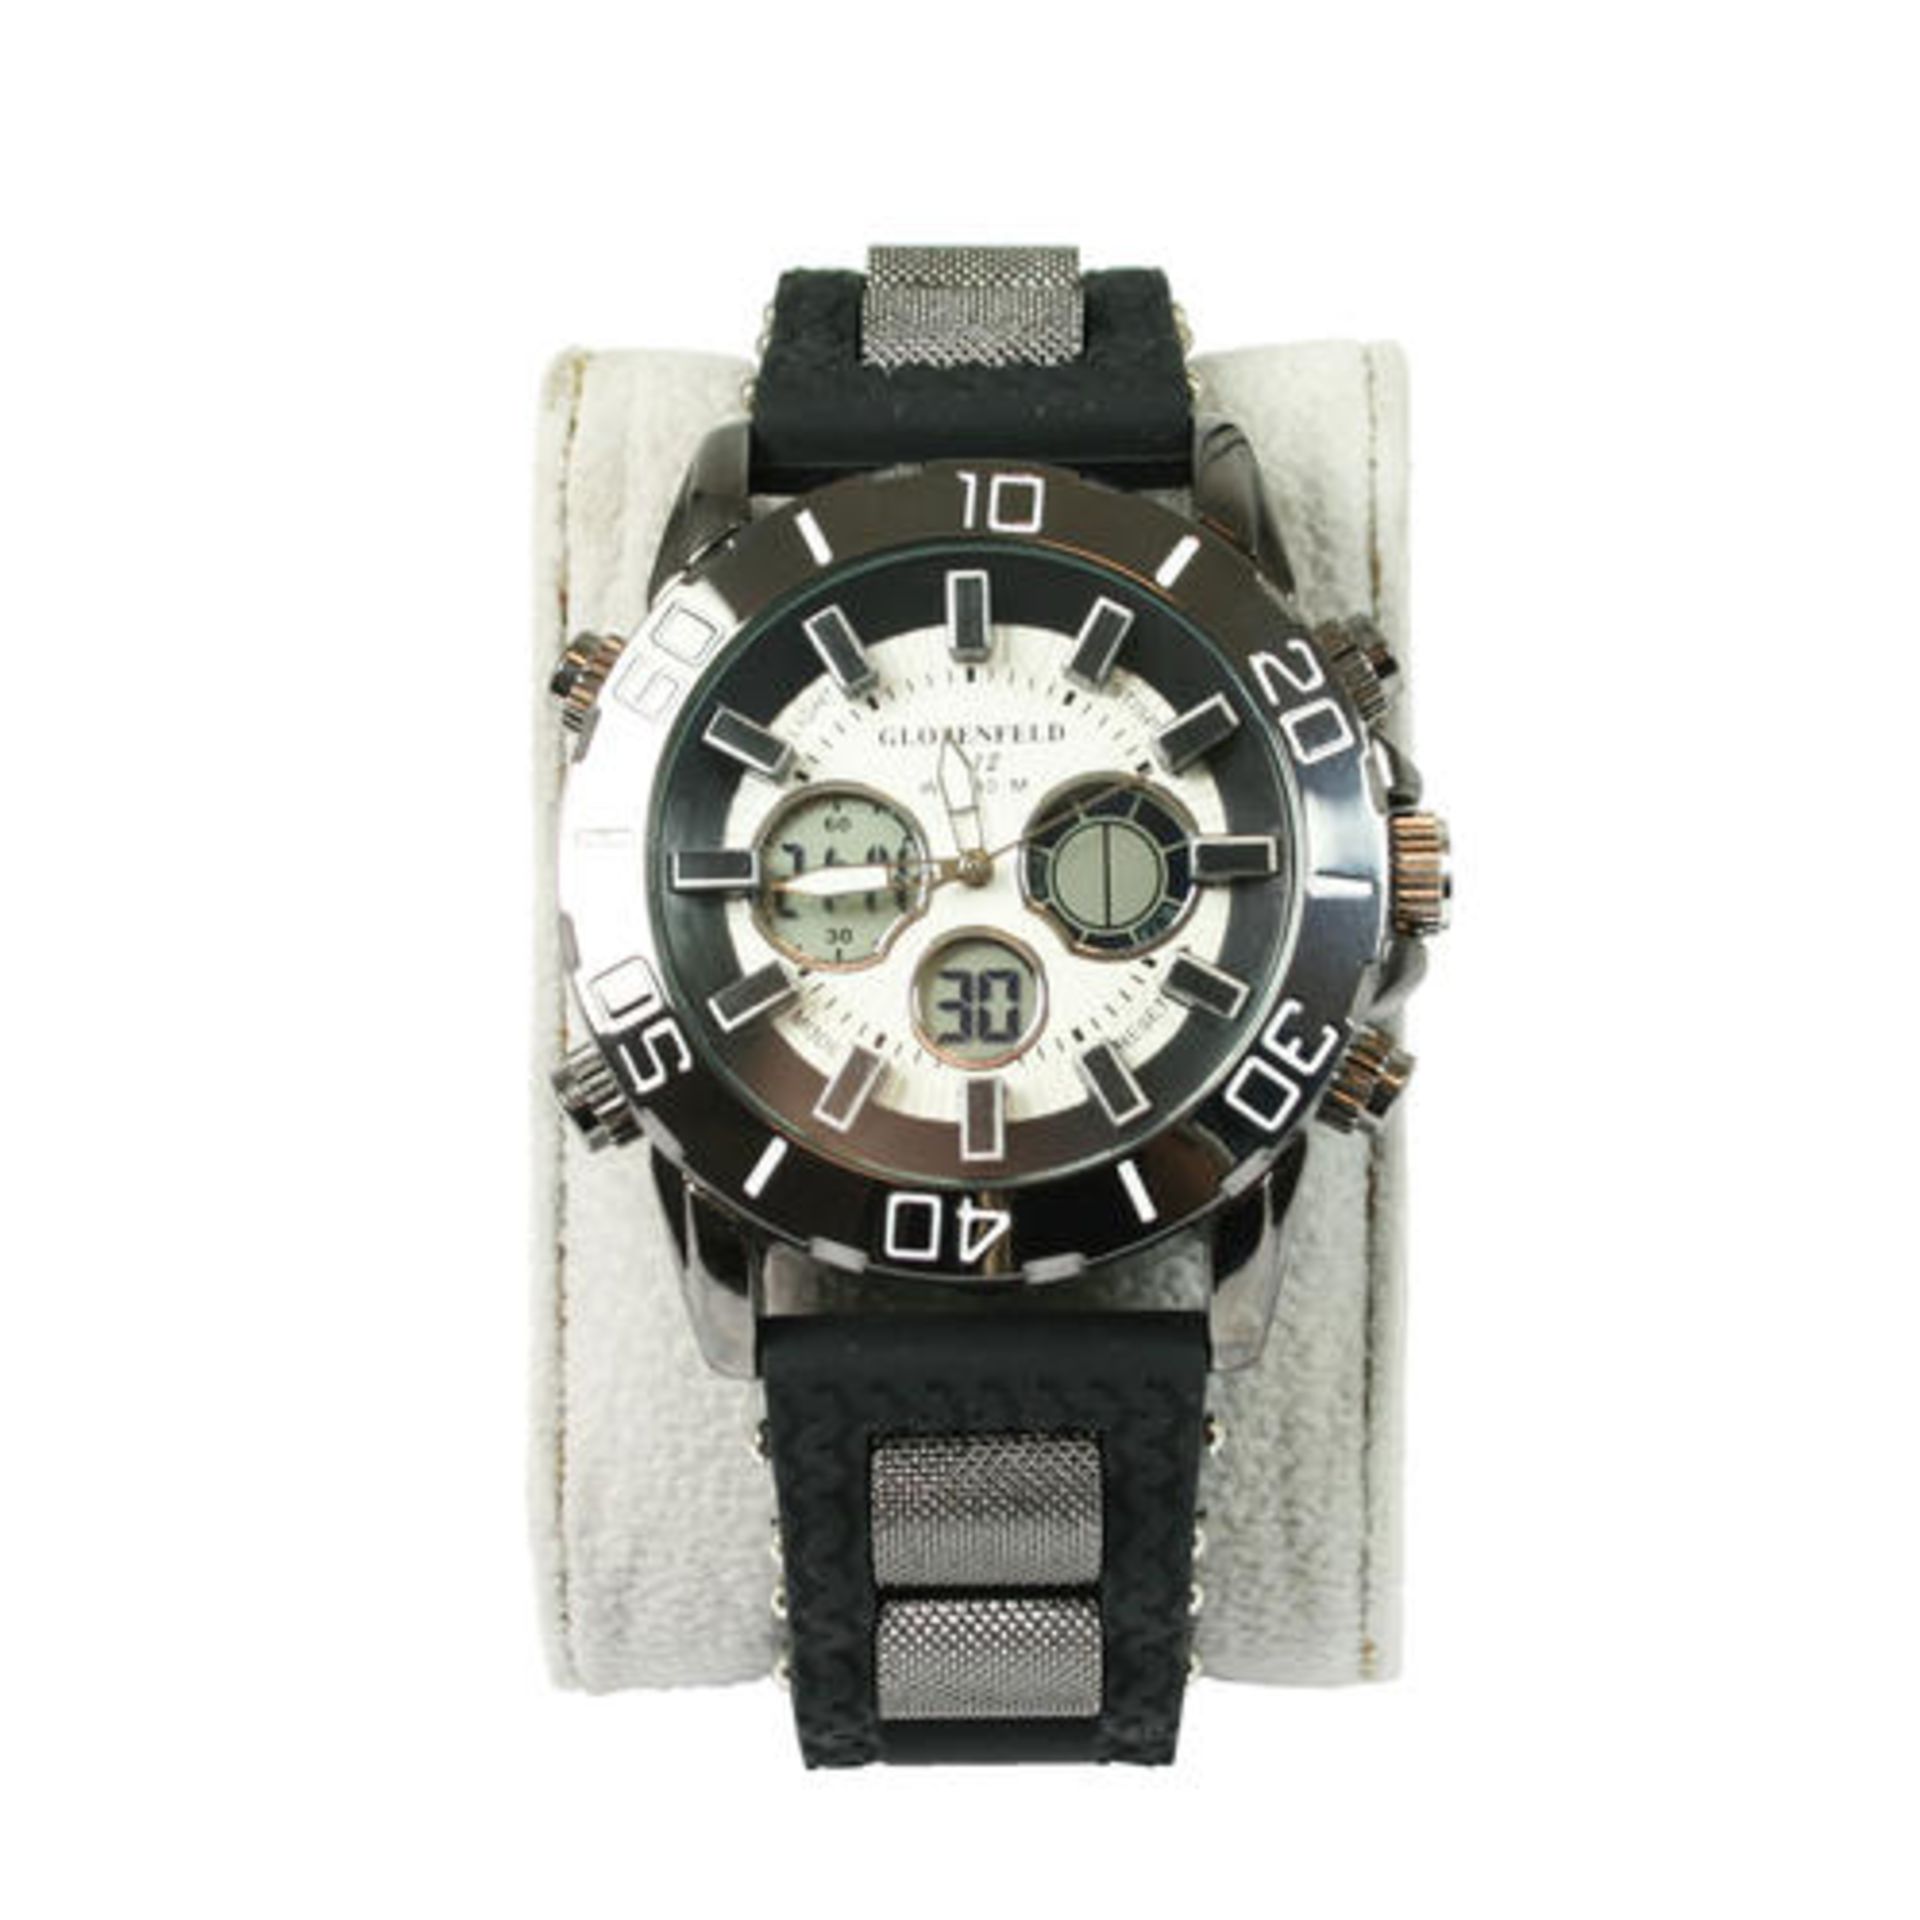 V Brand New Gents Globenfeld V.12 Limited Edition Watch RRP £425 With Box - Warranty - Papers Etc